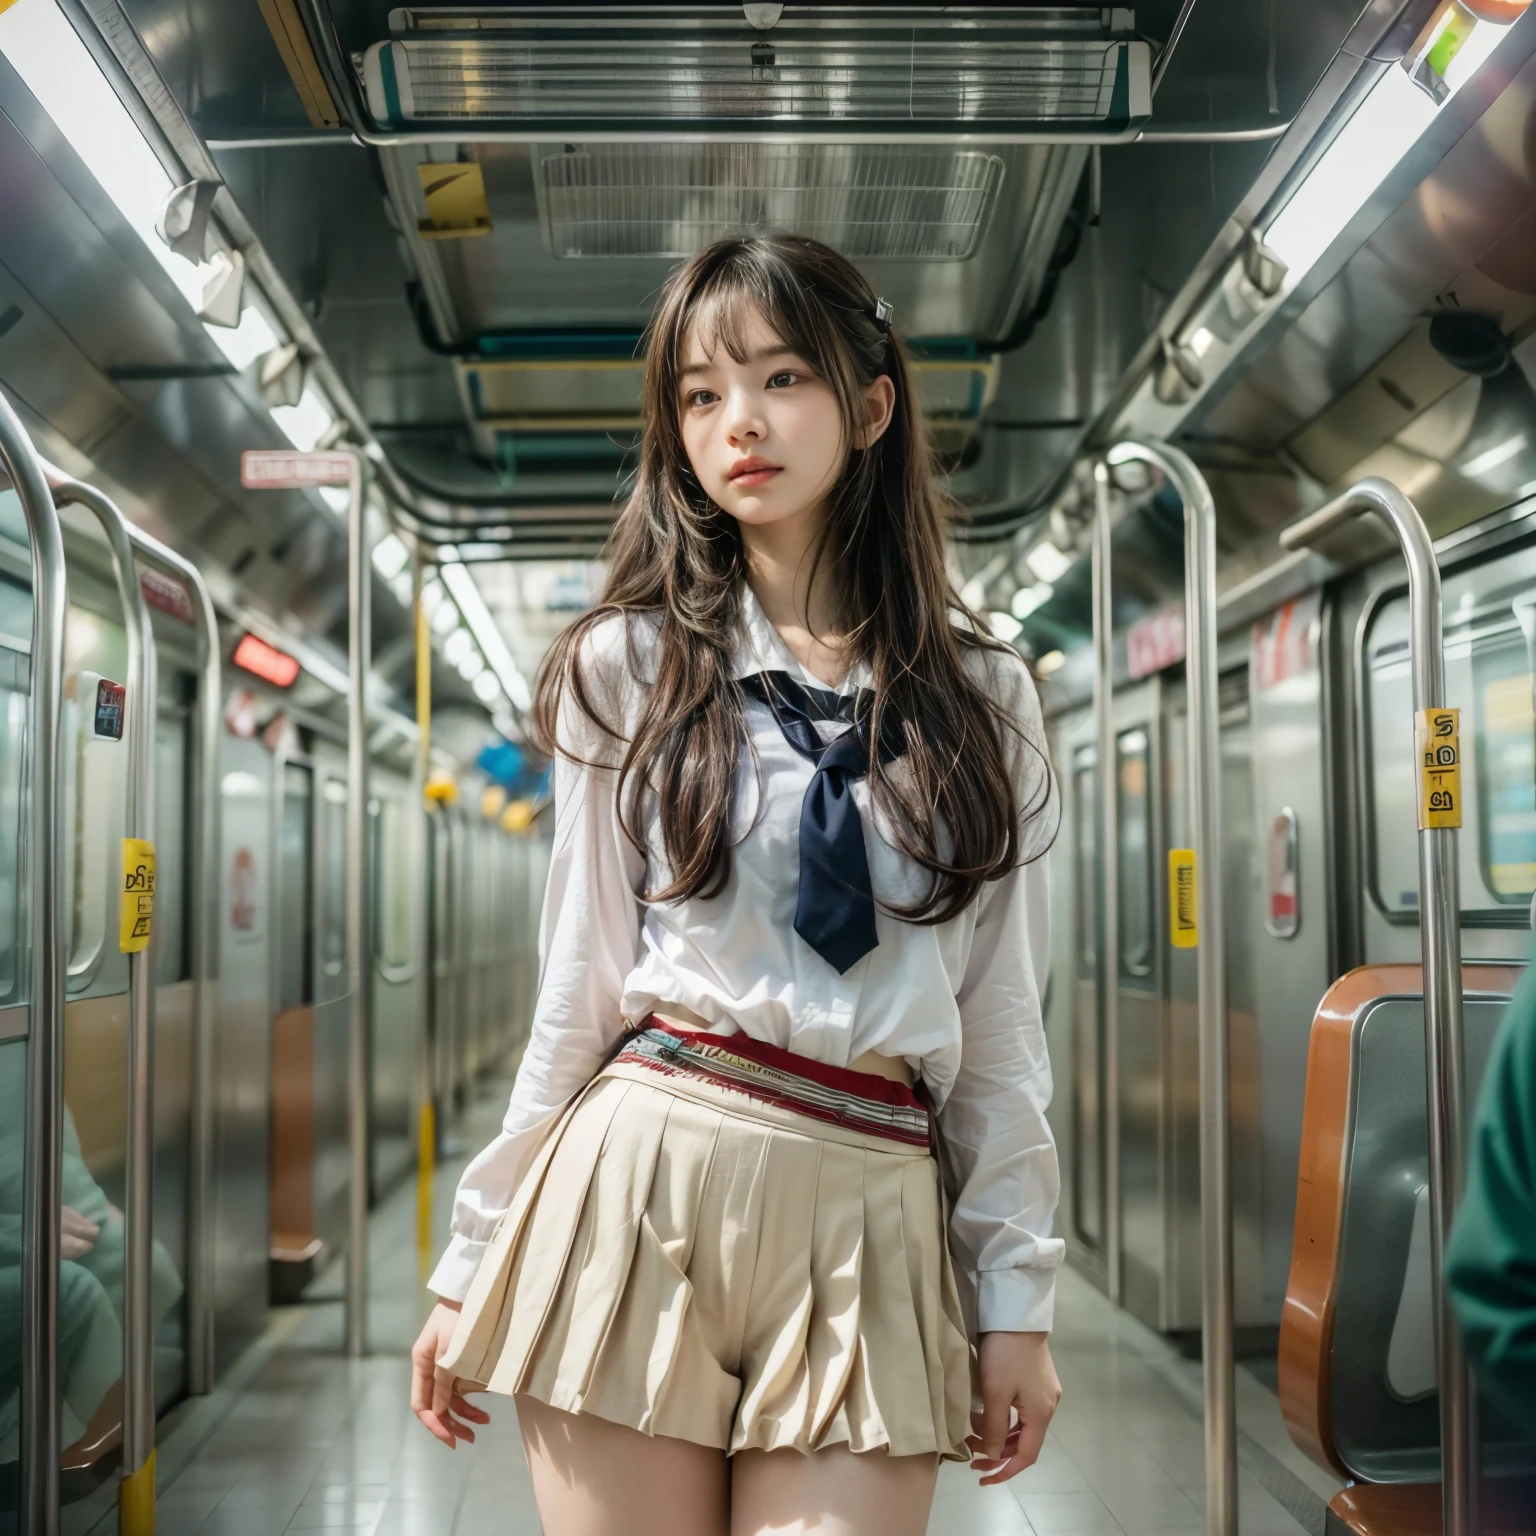 (realistic、Like a photograph、live action、8k, Photoreal, RAW photo, best image quality: 1.4), Single-lens reflex camera、RAW photo, highest quality, realistic, Highly detailed CG Unity 8k wallpaper, Depth of written boundary, cinematic light, Lens flare, ray tracing, realistic background、(school uniform:1.4、white shirt:1.1、best hip shot:1.4、pleated skirt、lift up the skirt、detailed lace panties)、((super dense skin))、 1 girl,cute japanese girl、((whole body:1.5)，(Touching the chest from behind:1.37、My butt is touched、molestation)、Looking back at the audience:1.1、embarrassed look、random hairstyle:1.2、i like the style、pay attention to details、long hair、perfect costume、(white skin)、beautiful feet:1.1，Standing in the subway